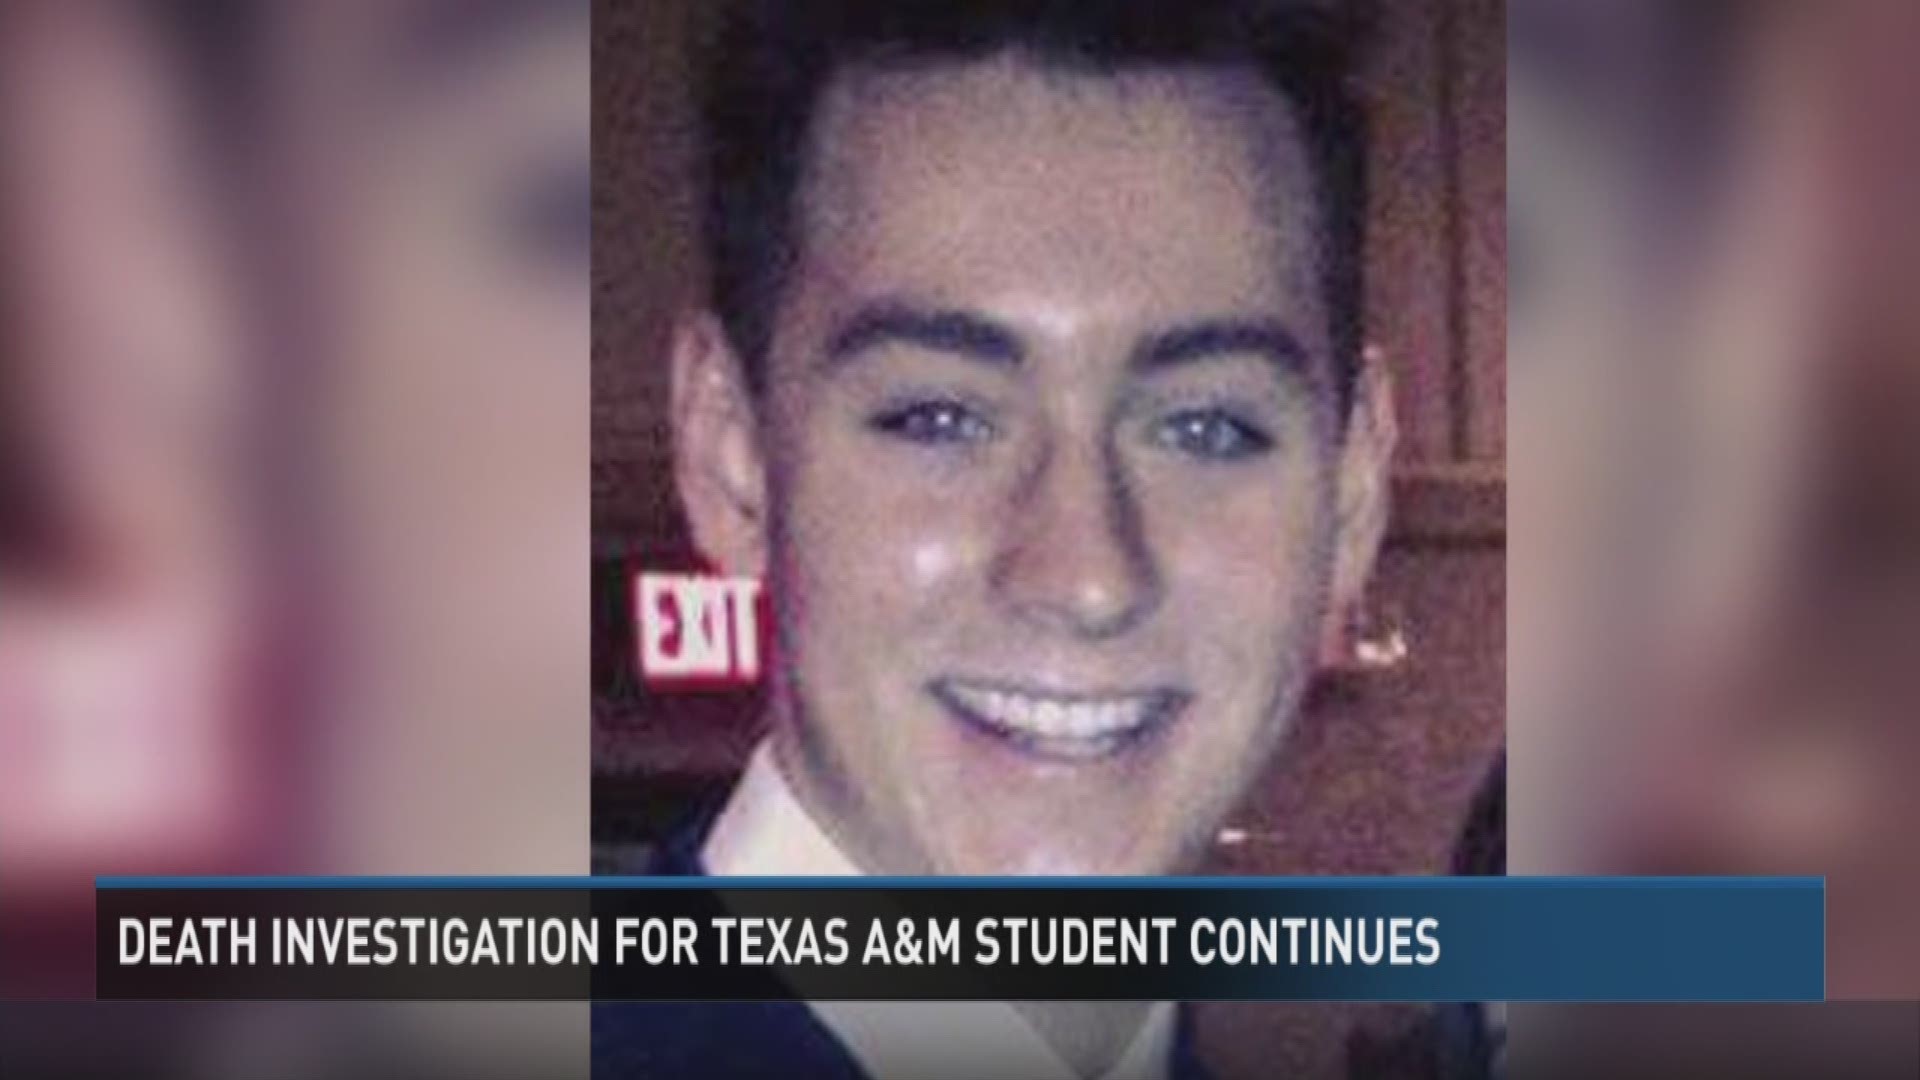 Legacy Christian Academy's 2015 valedictorian has been identified as the 20 year-old man found dead at a Texas A&M fraternity house Tuesday.